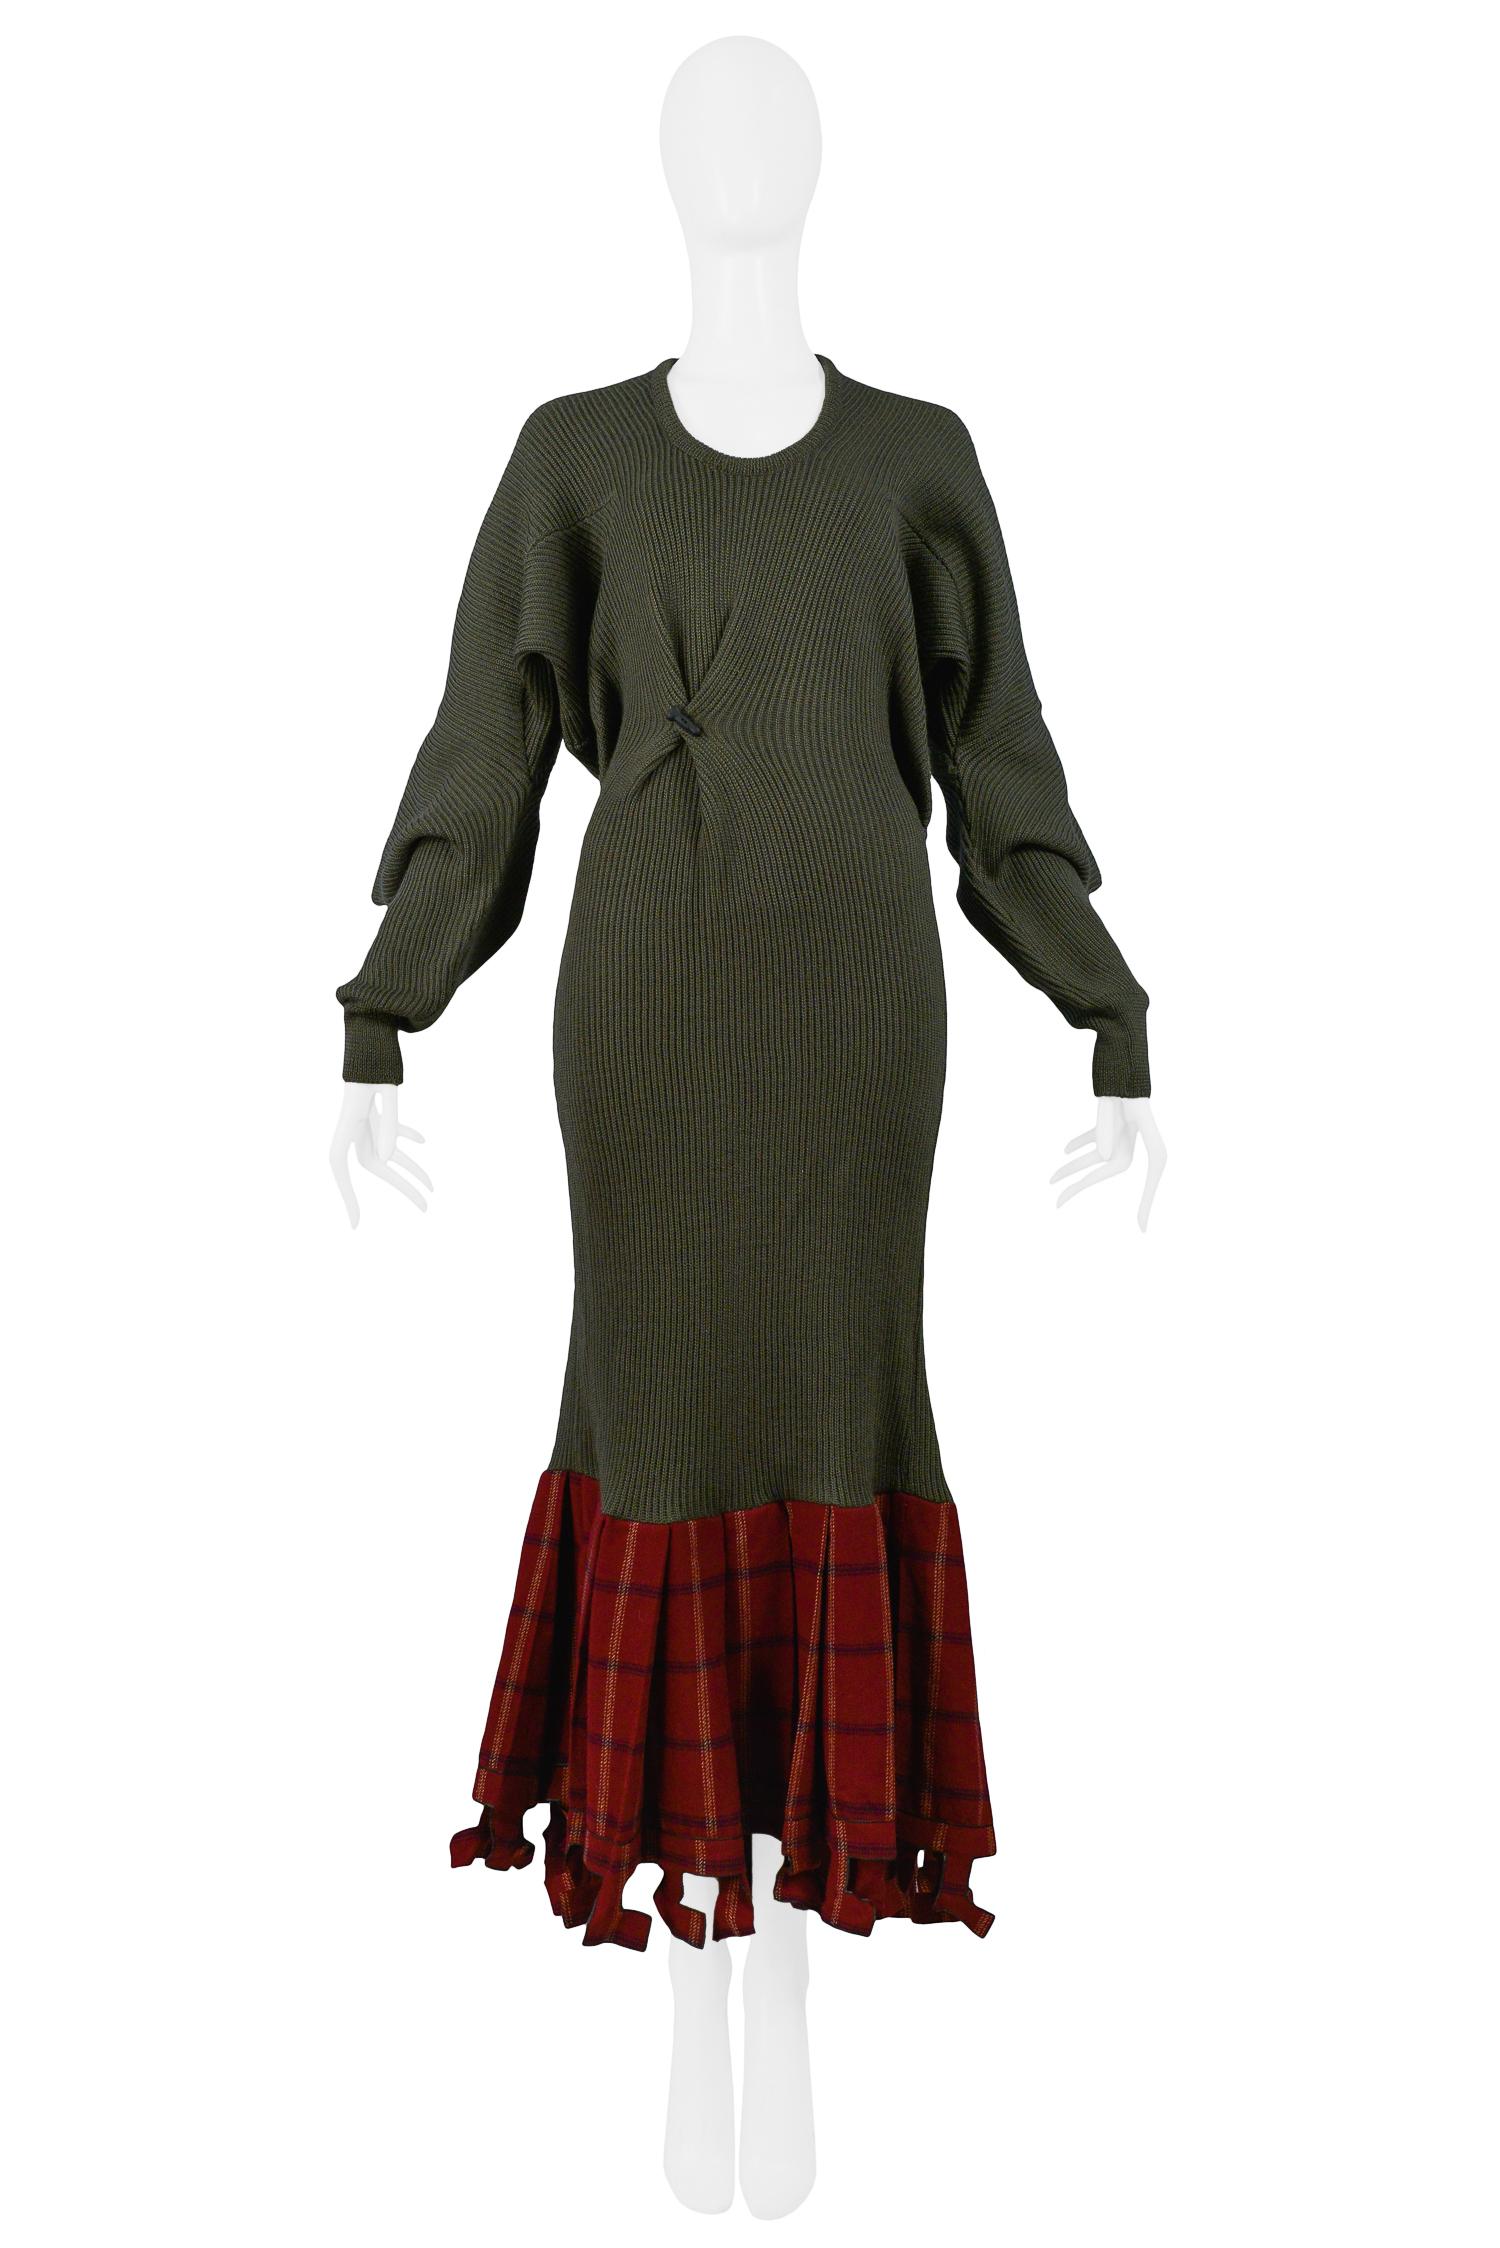 Vintage Westwood McLaren Worlds End olive wool ribbed knit dress featuring a red pleated plaid flounce hem with cut-out detailing, oversized angular elbows, and iconic black penis buttons on the front and back bodice. From the Clint Eastwood AW